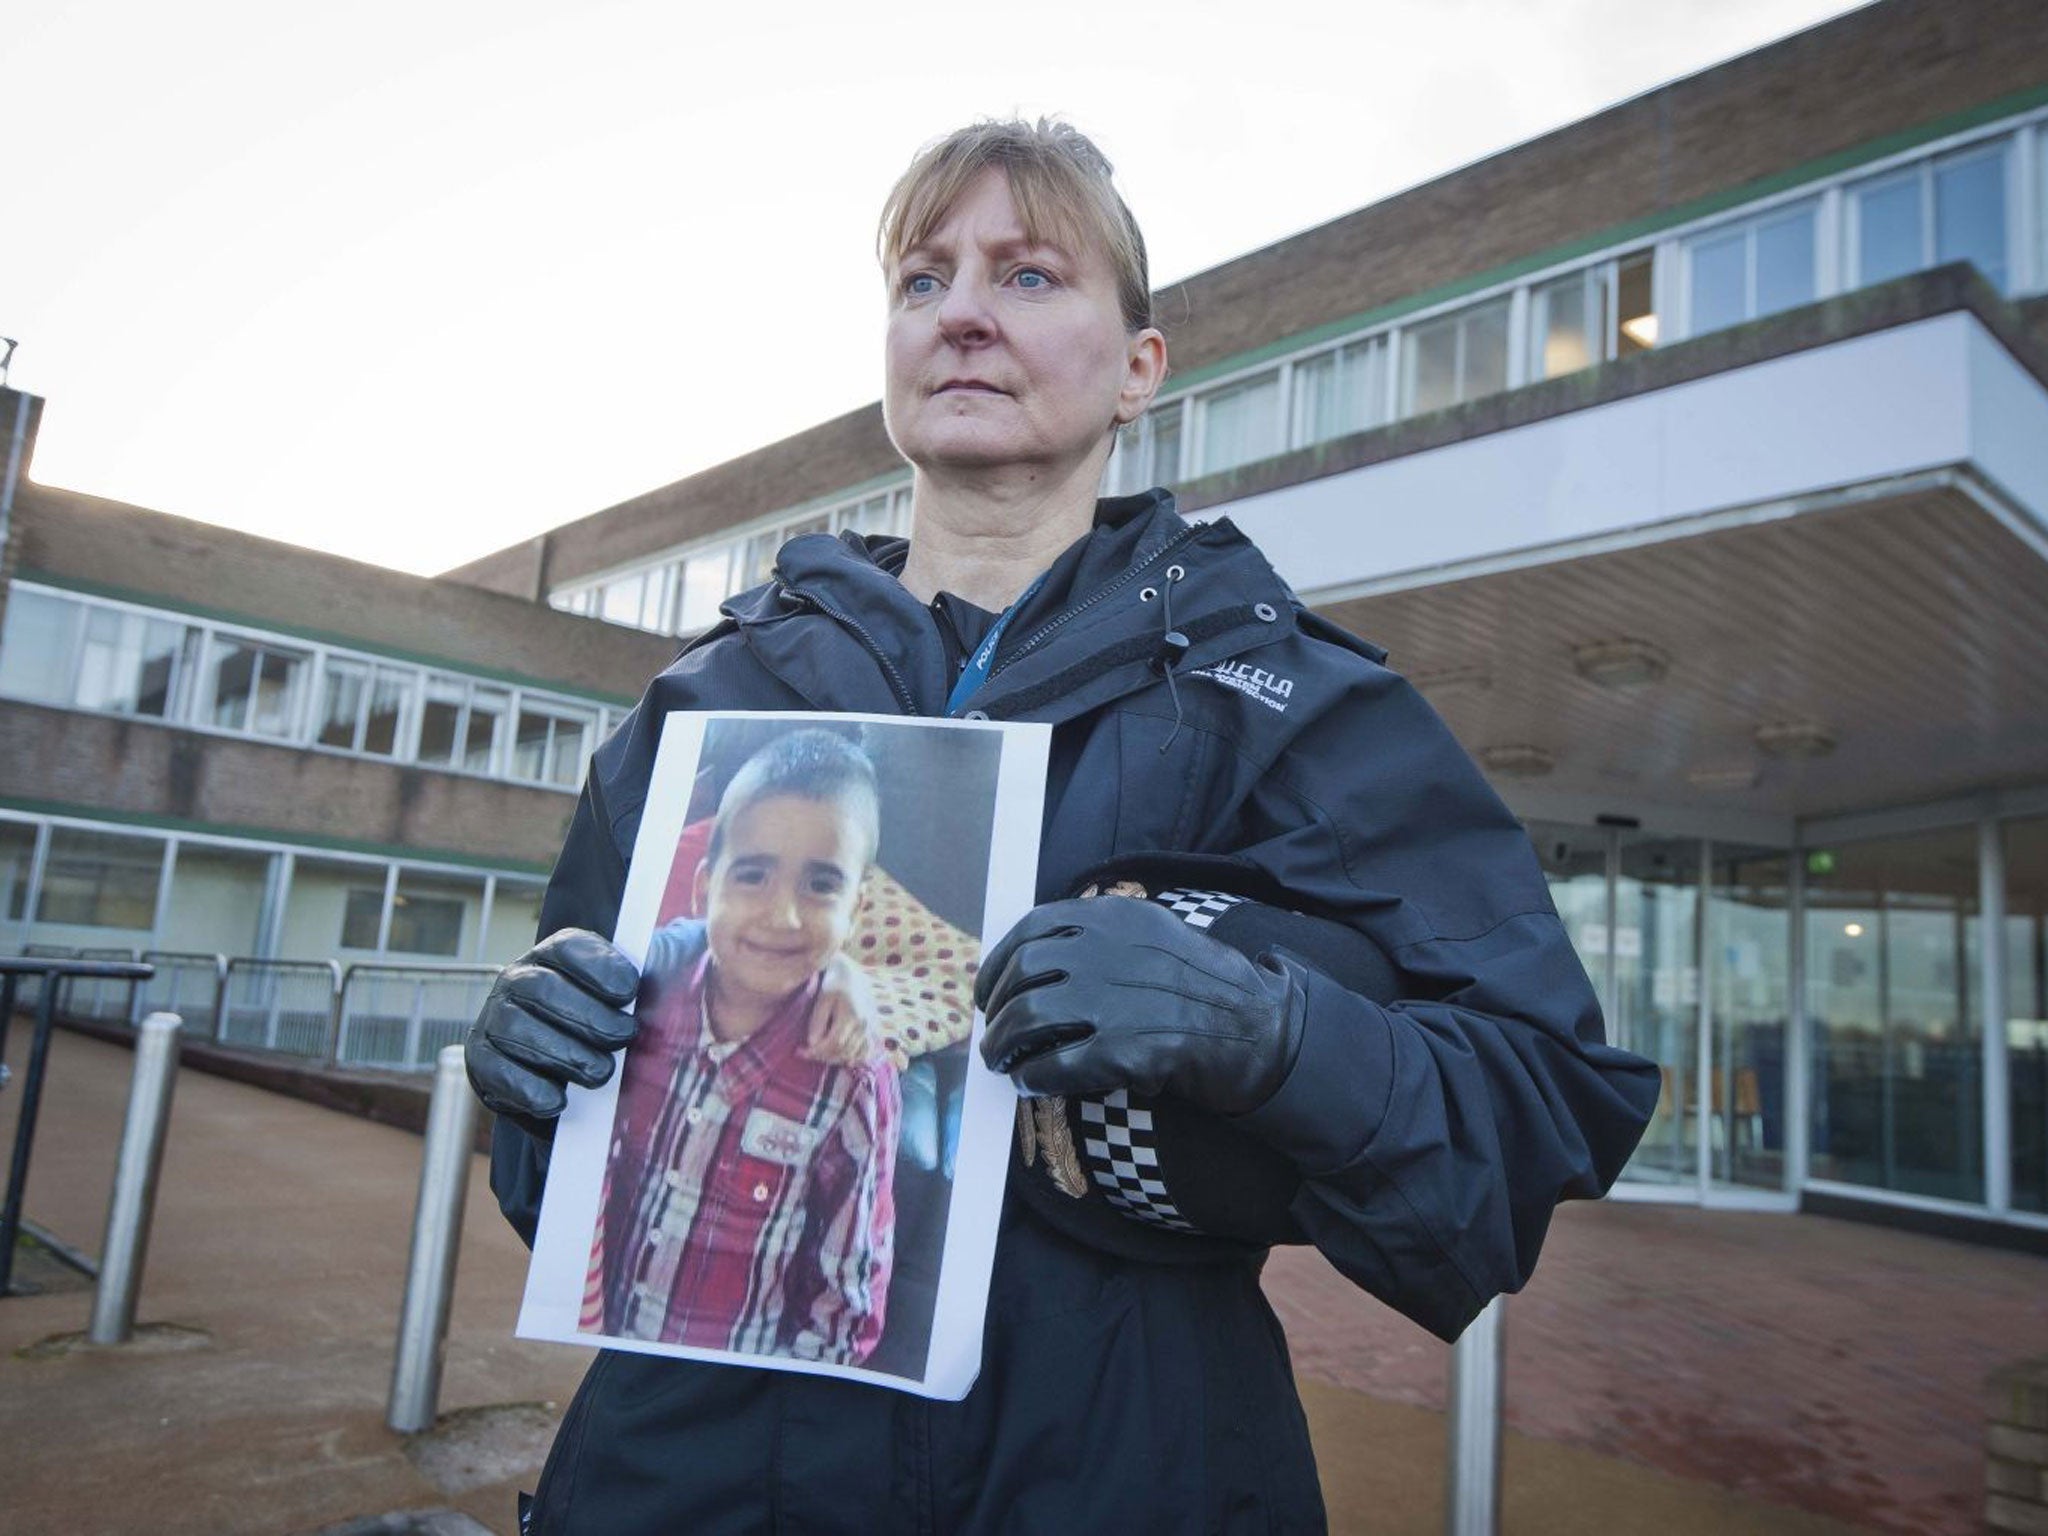 Superintendent Liz McCainsh holds a photo of missing 3-year-old boy Mikaeel Kular who was last seen going to bed at his family's flat, at around 9pm and was discovered missing from his bed by his mother at around 7.15am when the family woke up